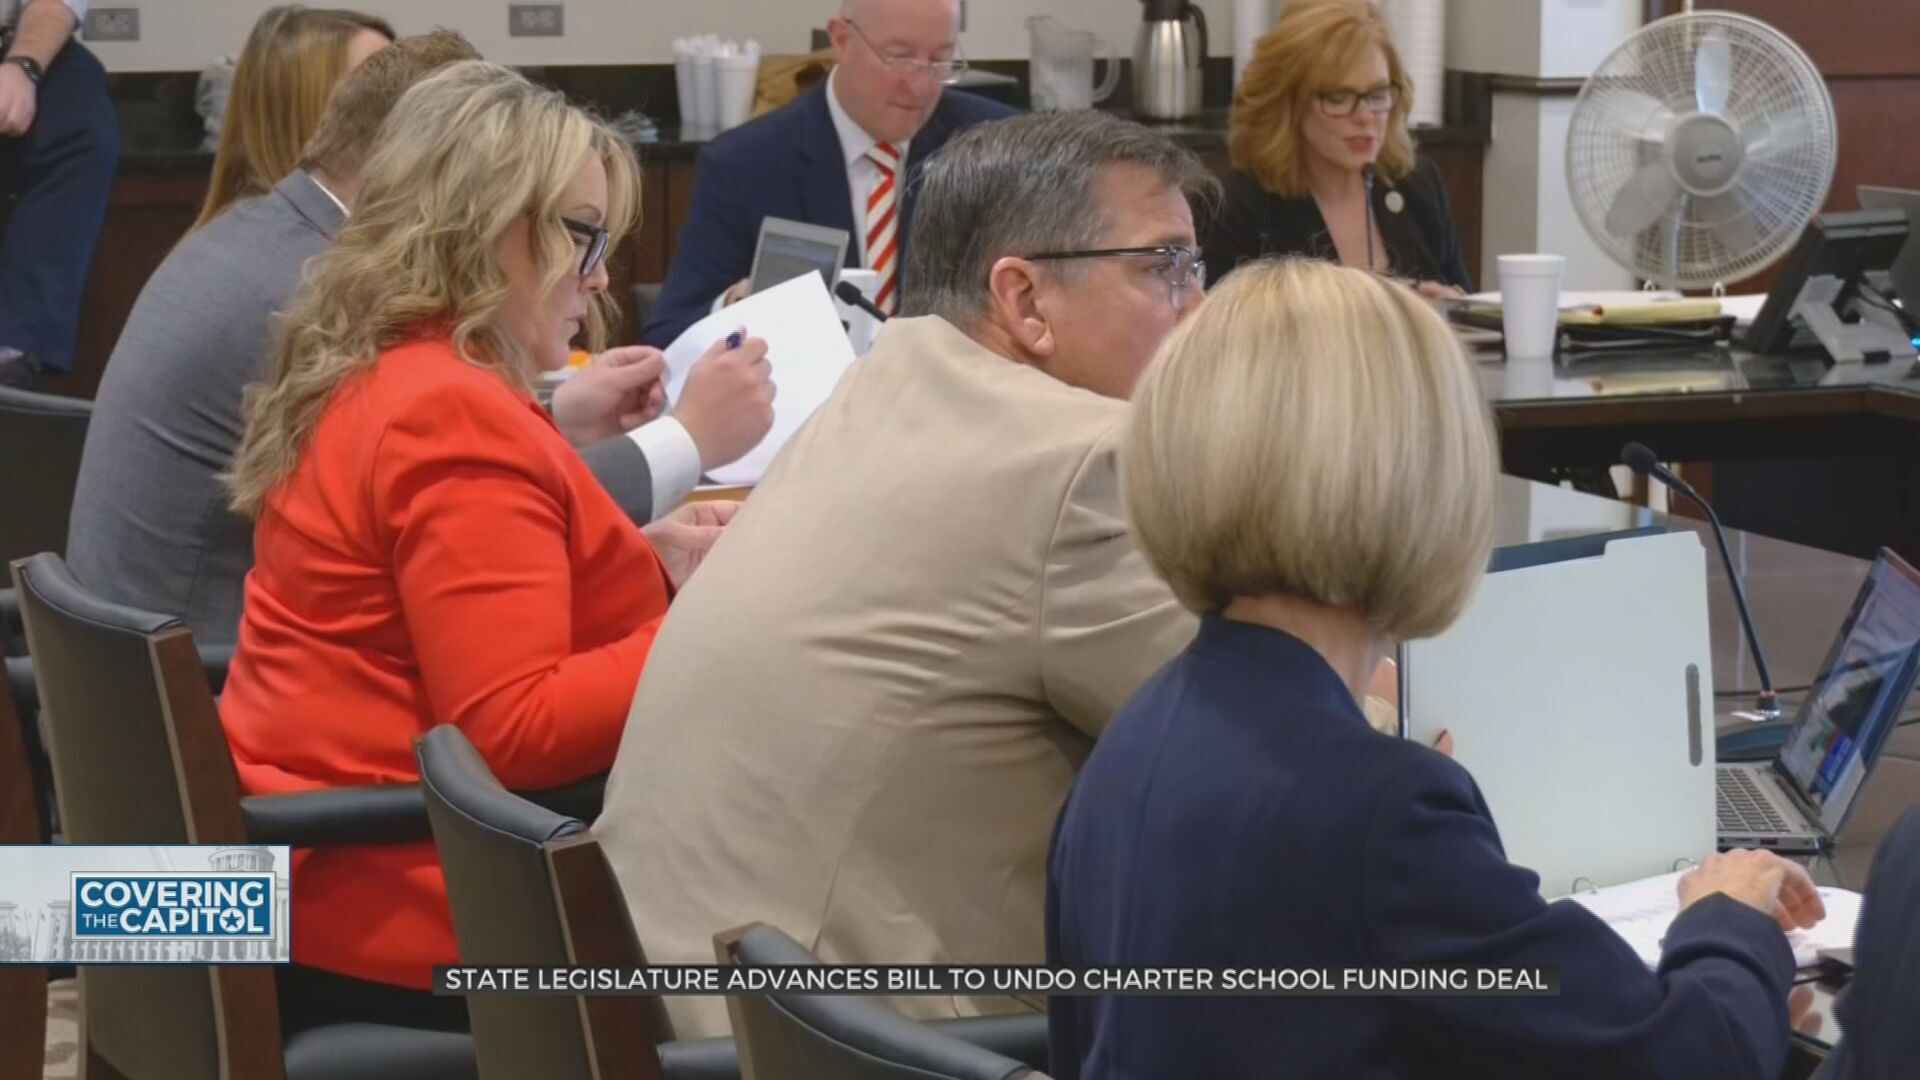 'No Charters Will Get Local Dollars': Bill Seeks To Reverse Charter School Settlement